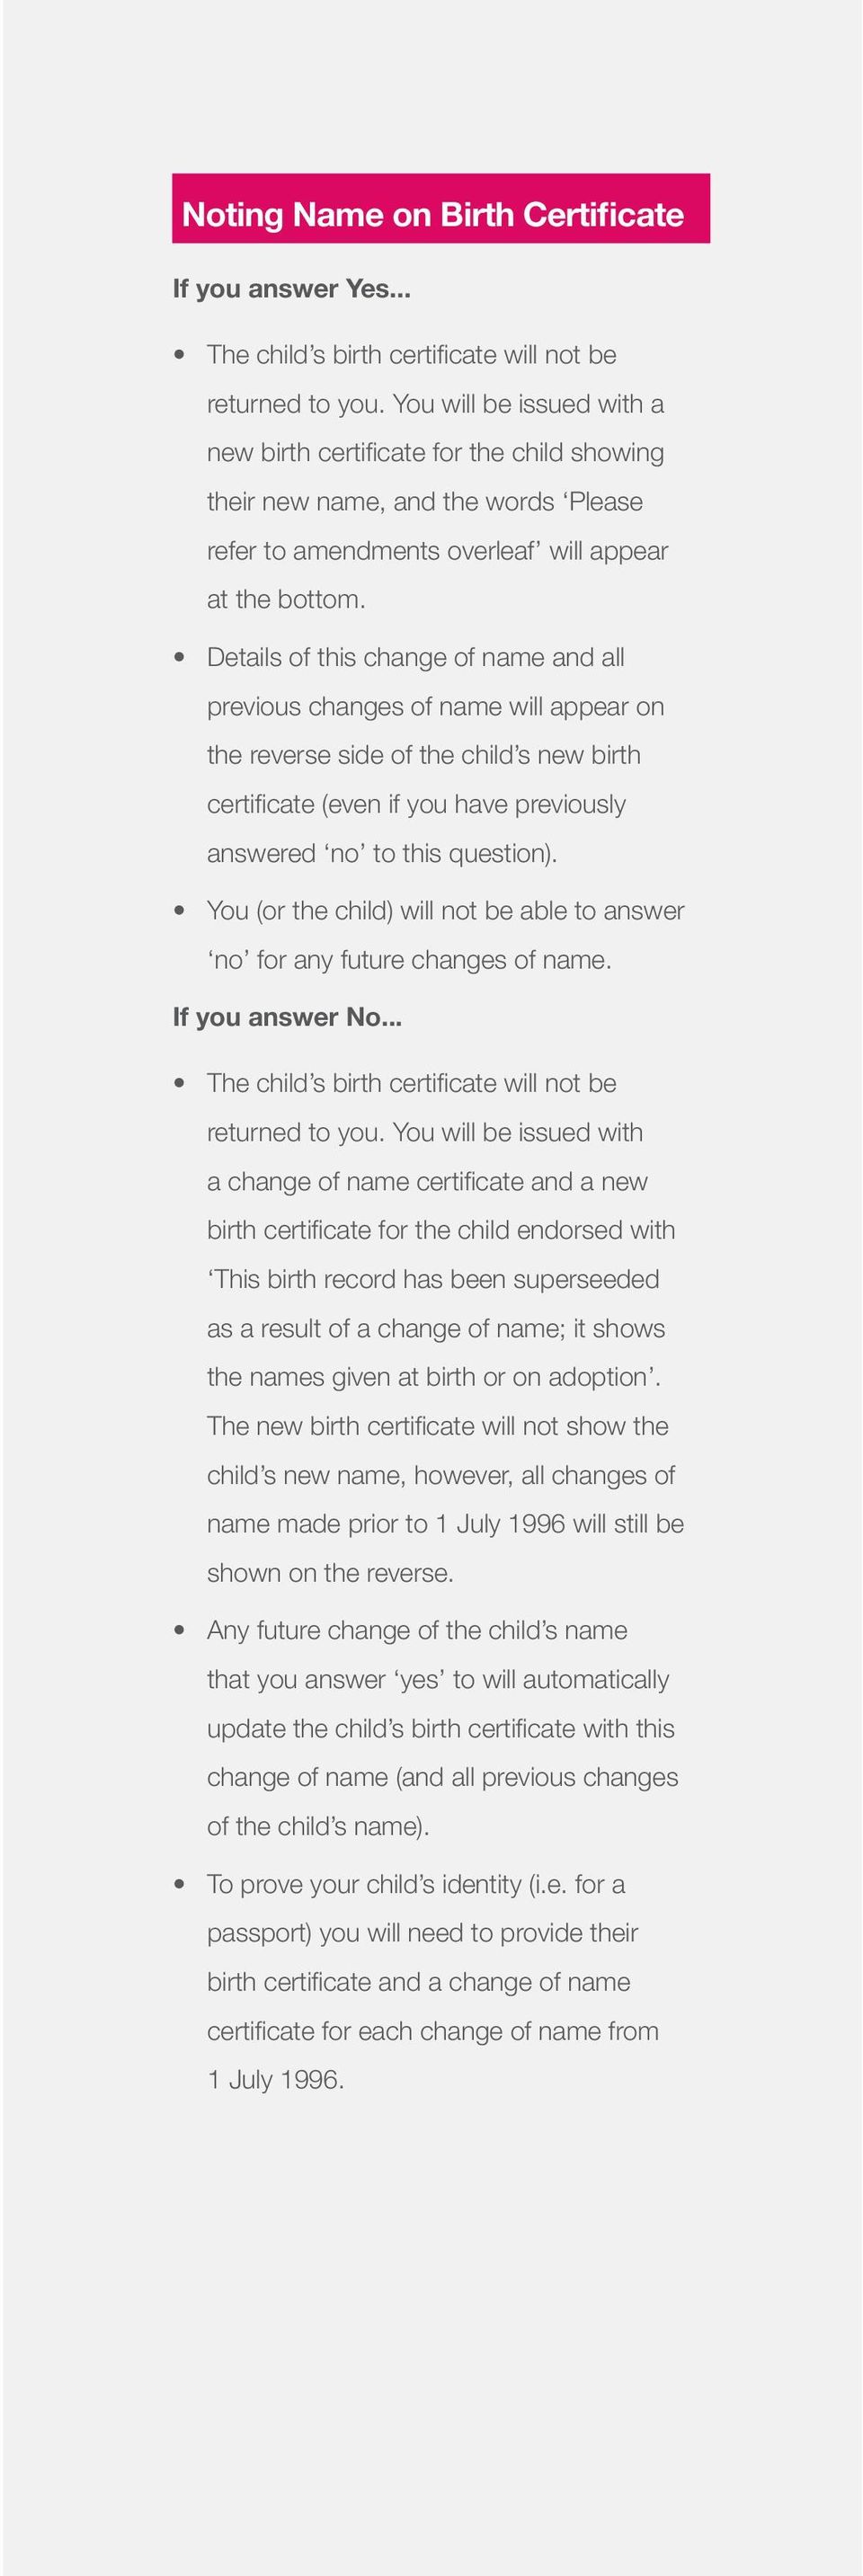 Details of this change of name and all previous changes of name will appear on the reverse side of the child s new birth certificate (even if you have previously answered no to this question).